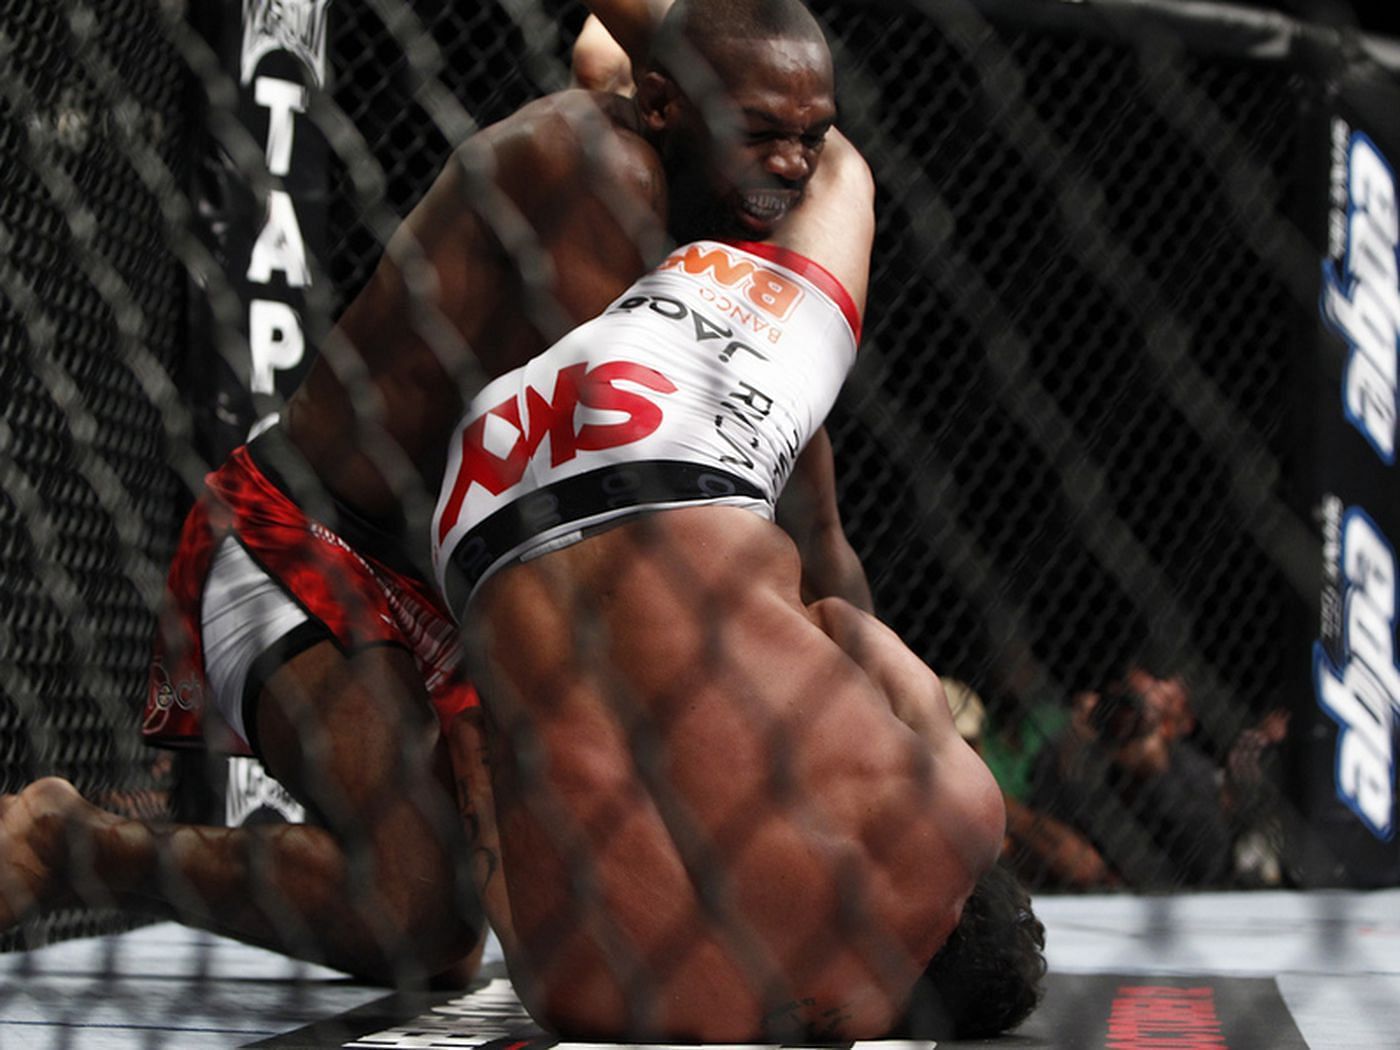 Vitor Belfort almost shocked the world by coming close to submitting Jon Jones in 2012